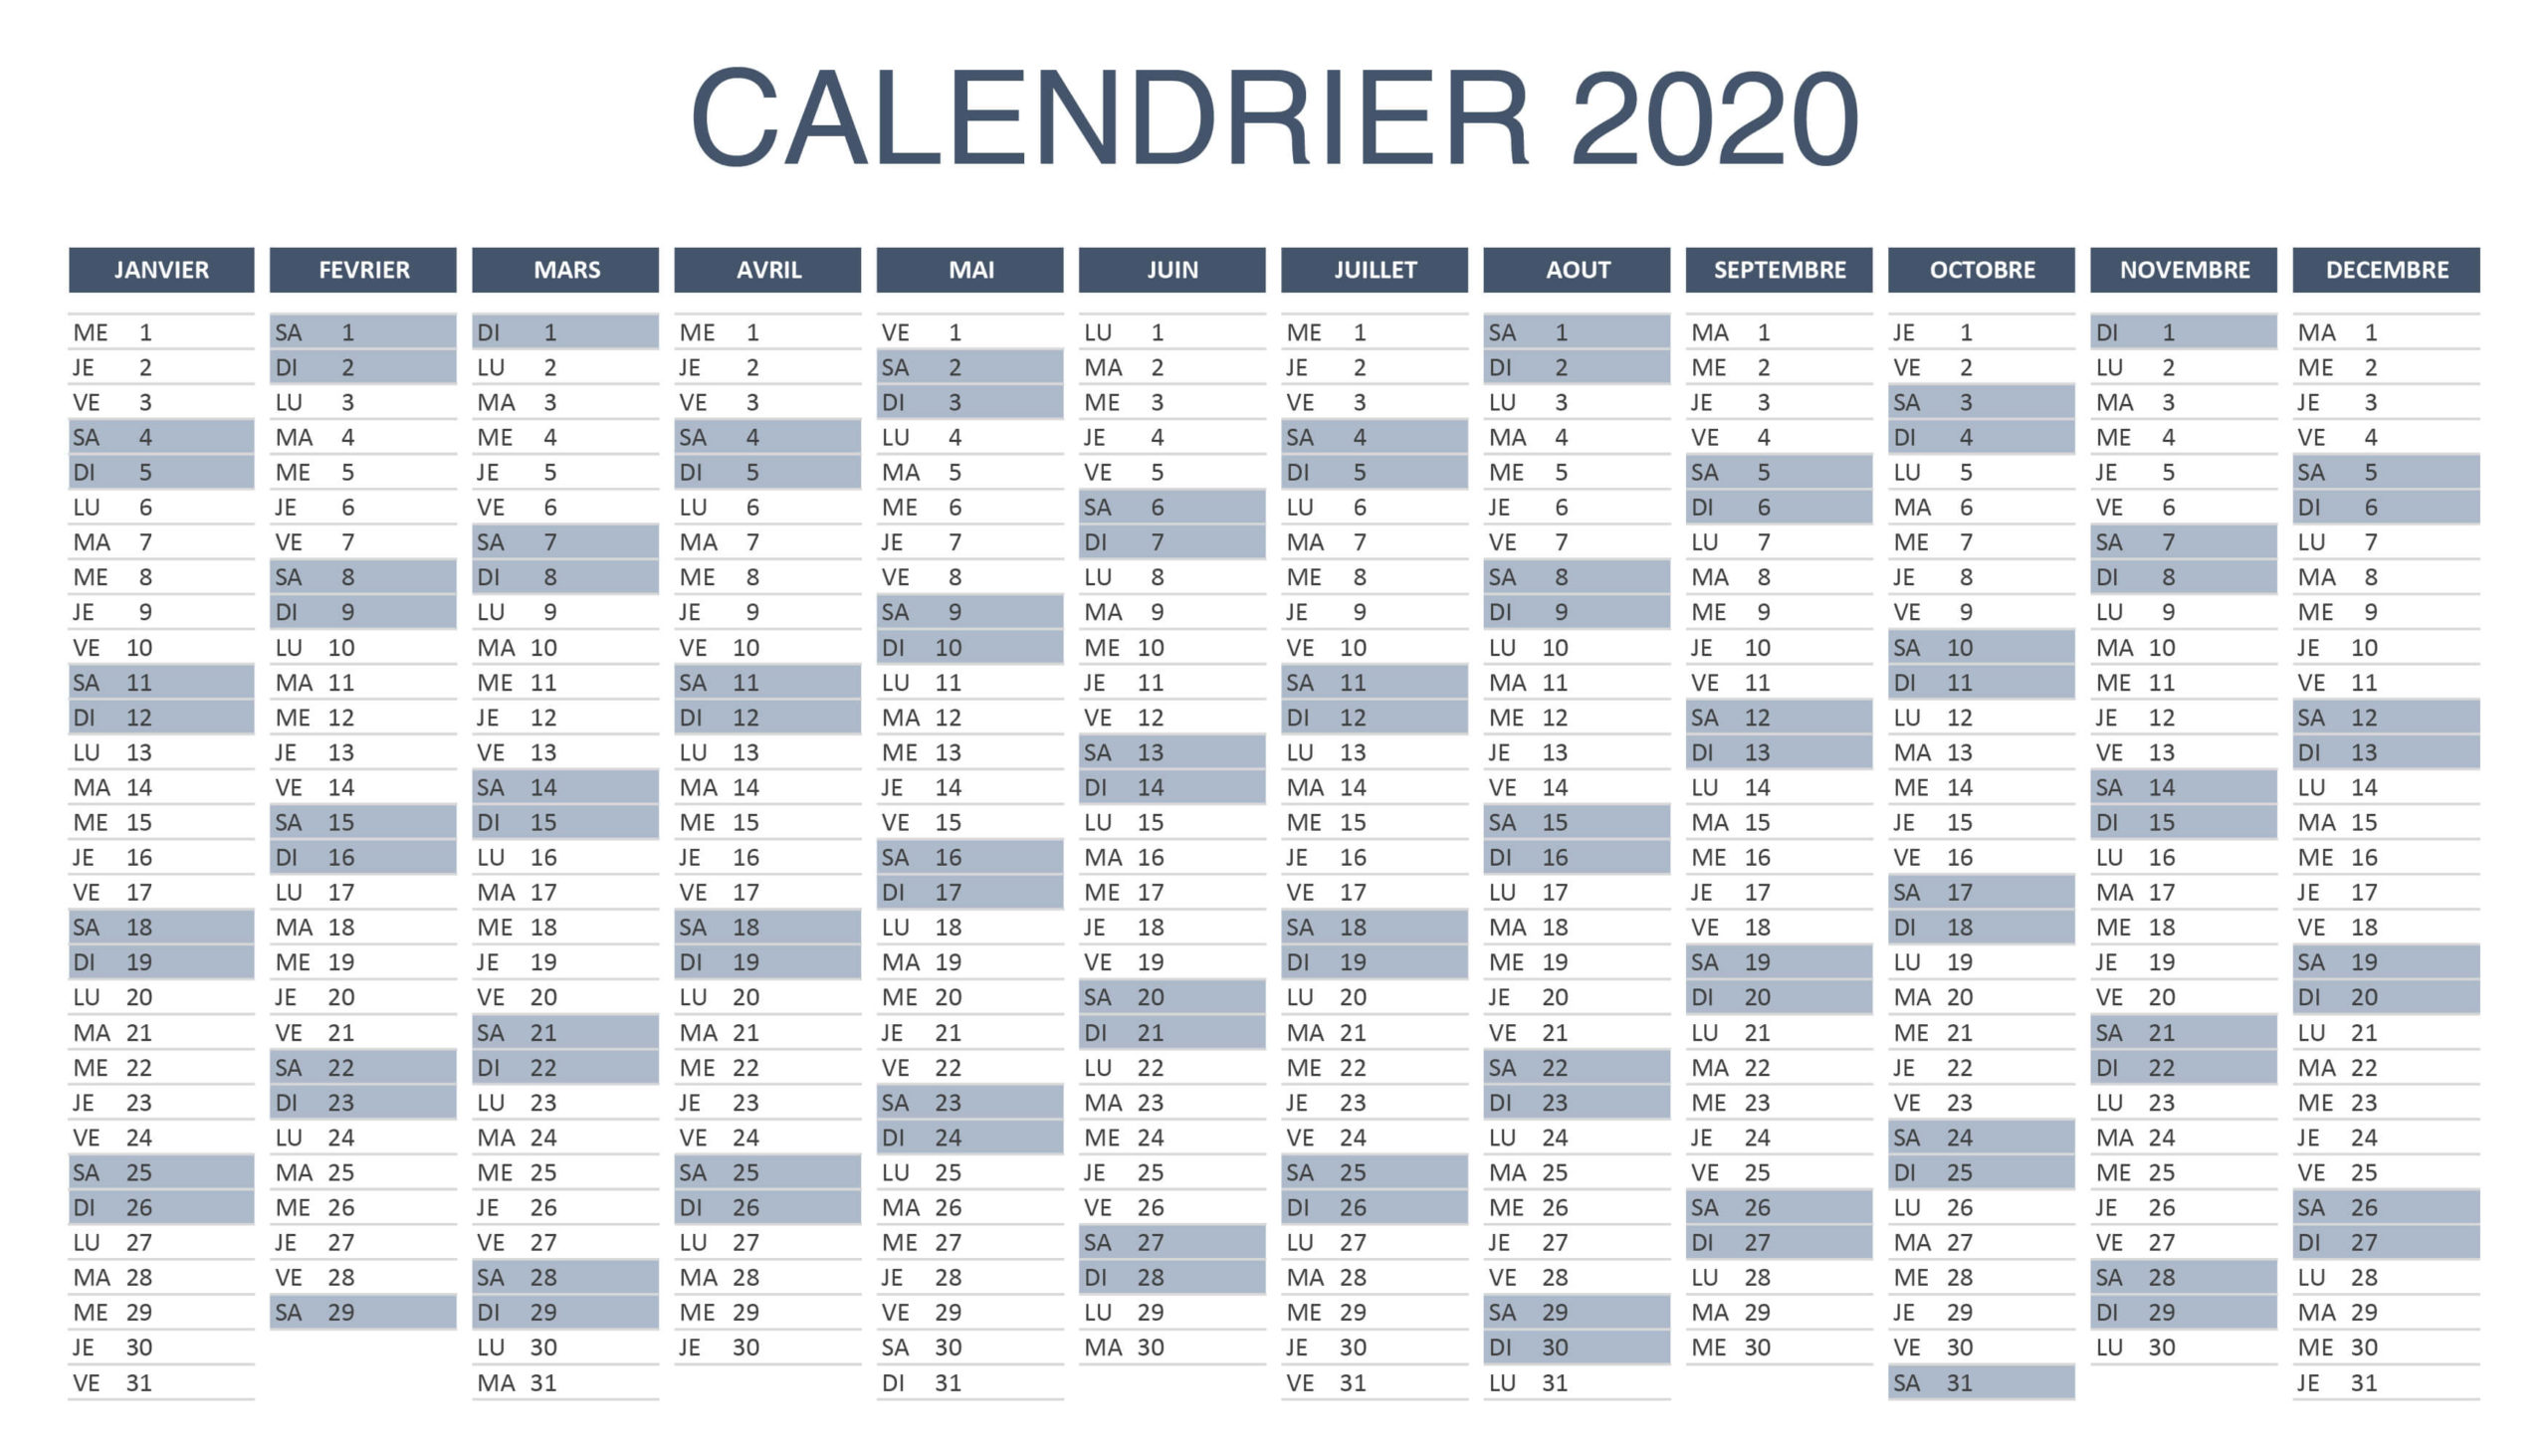 Calendrier Excel 2020